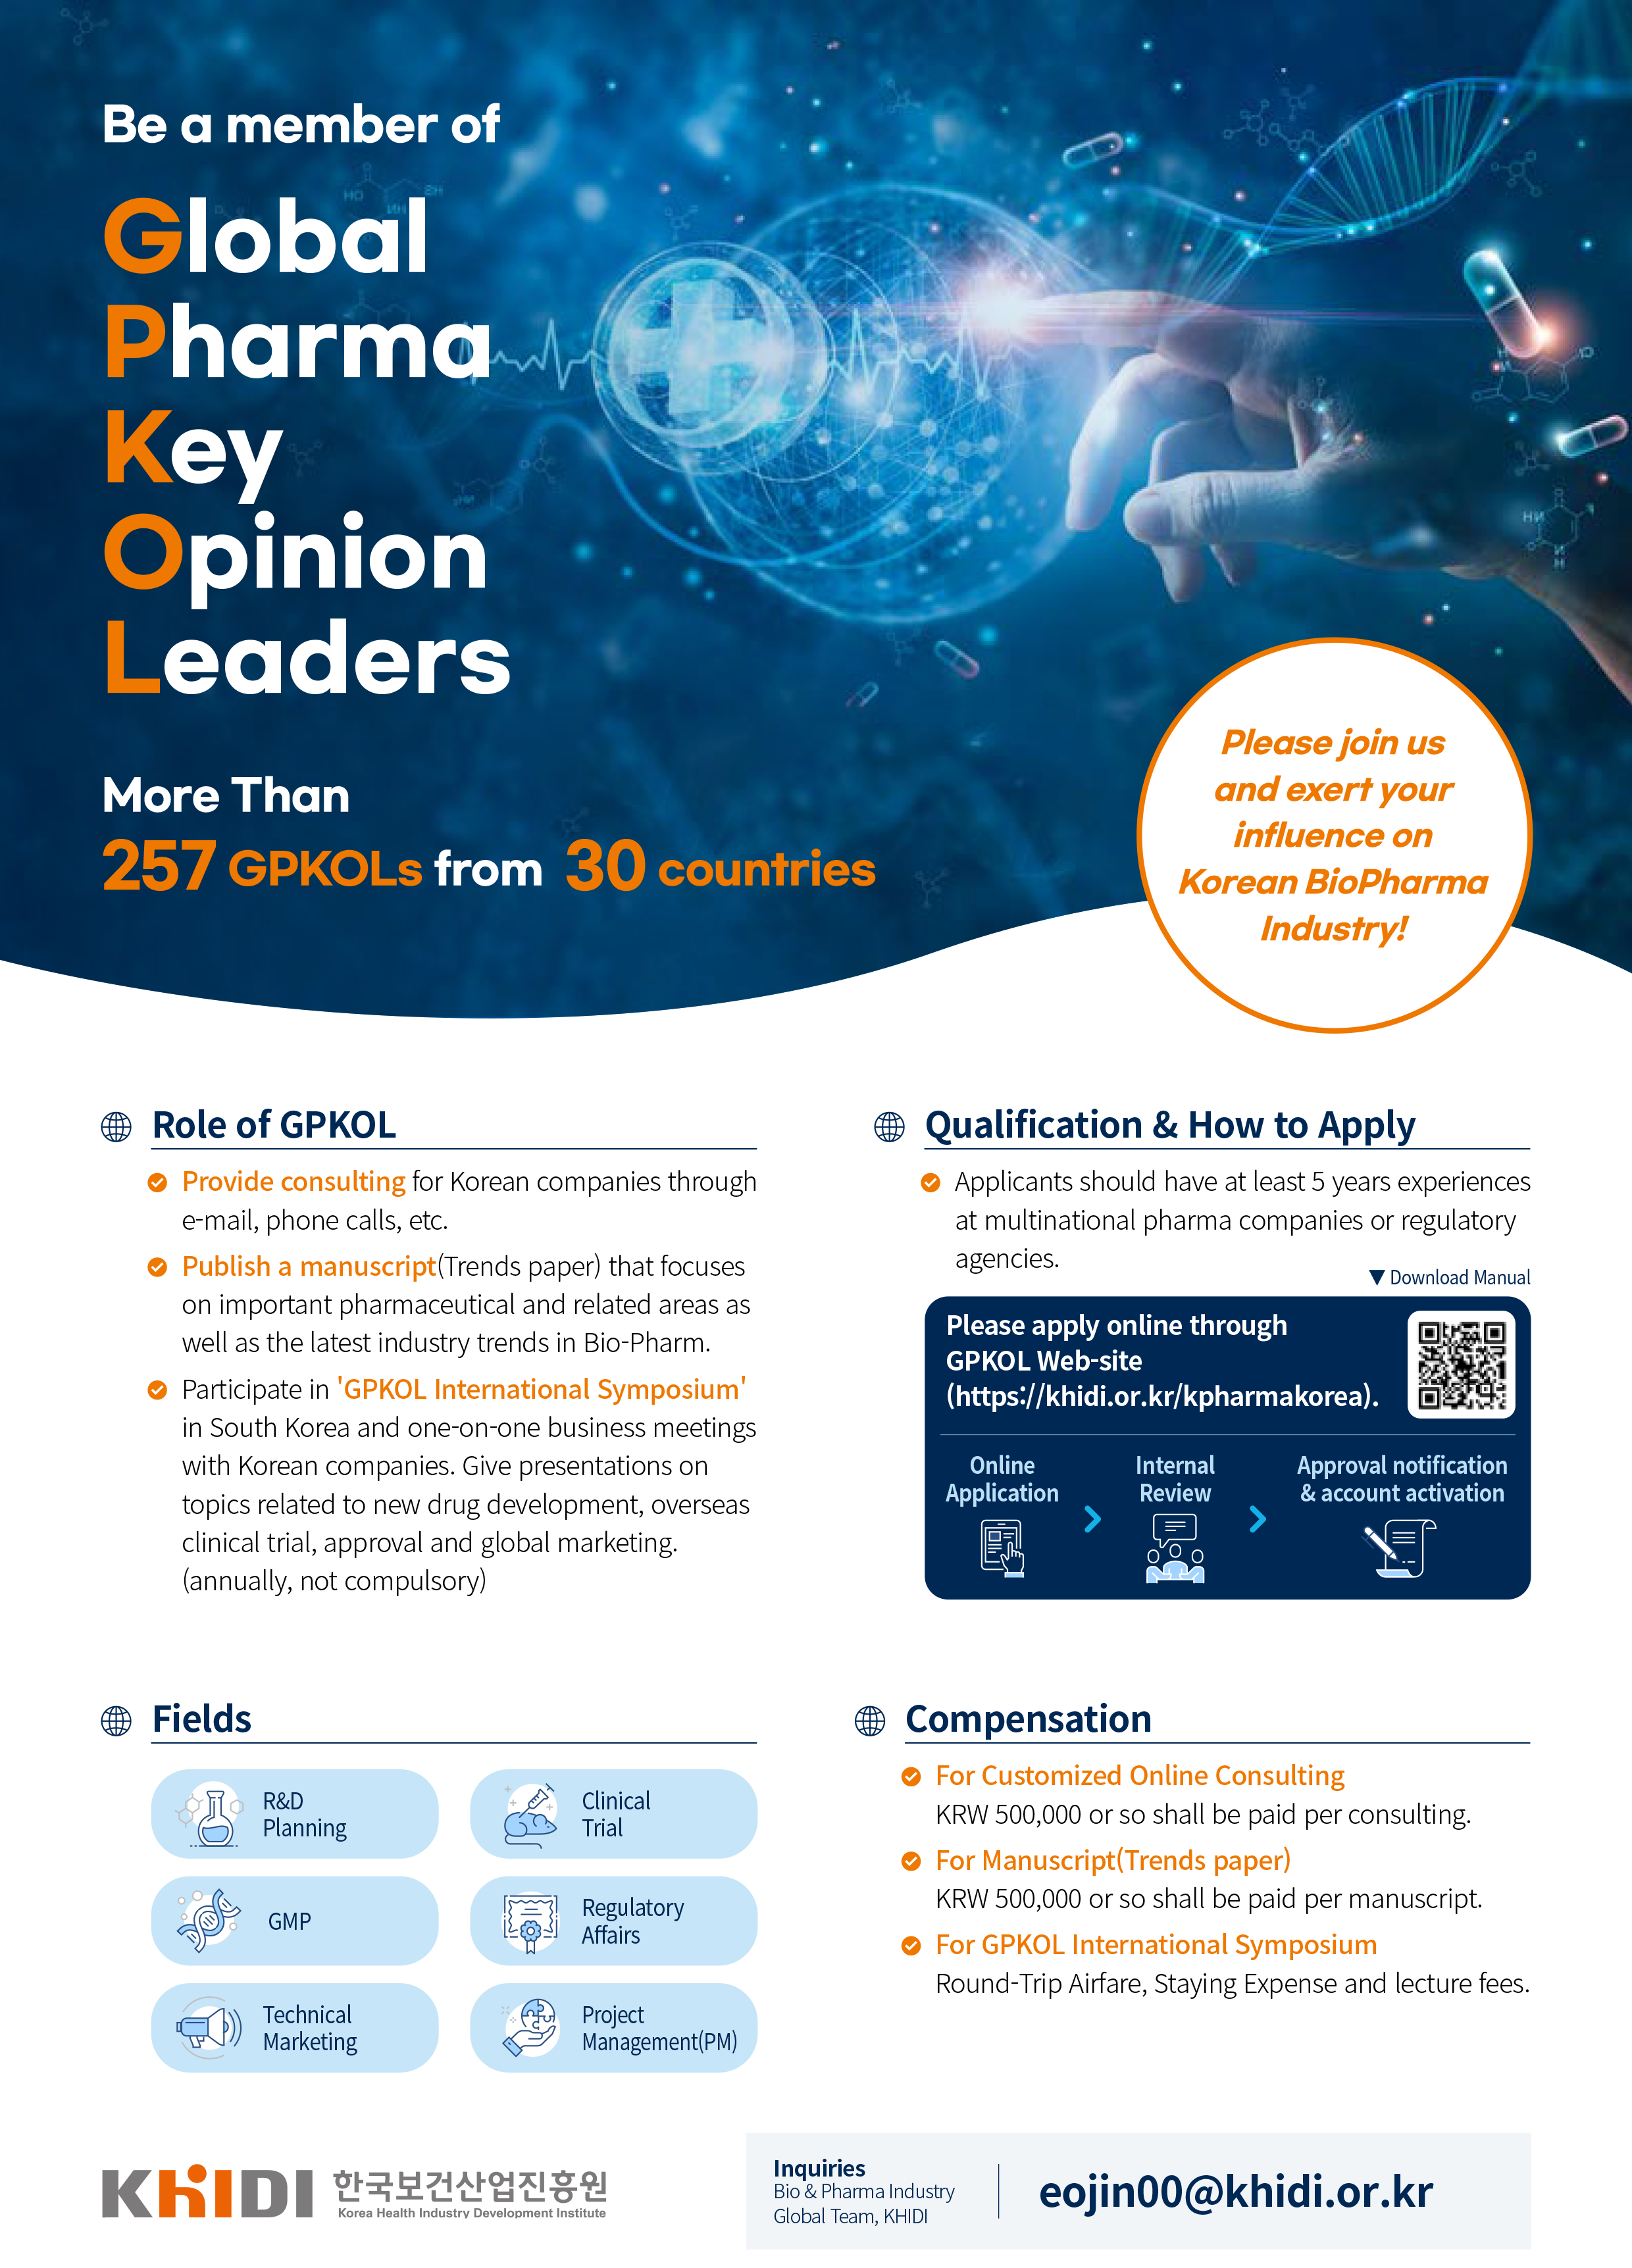 Be a member of Global Pharma Key Opinion Leaders More than 257 GPKOLs from 30 countries, Please join us and exert your influence on Koeran BioPharma Industry! Role of GPKOL, Fields, Qualification&How to Apply, Compensation Inquiries Bio&Pharma Industry Global Team, KHIDI eojin00@khidi.or.kr